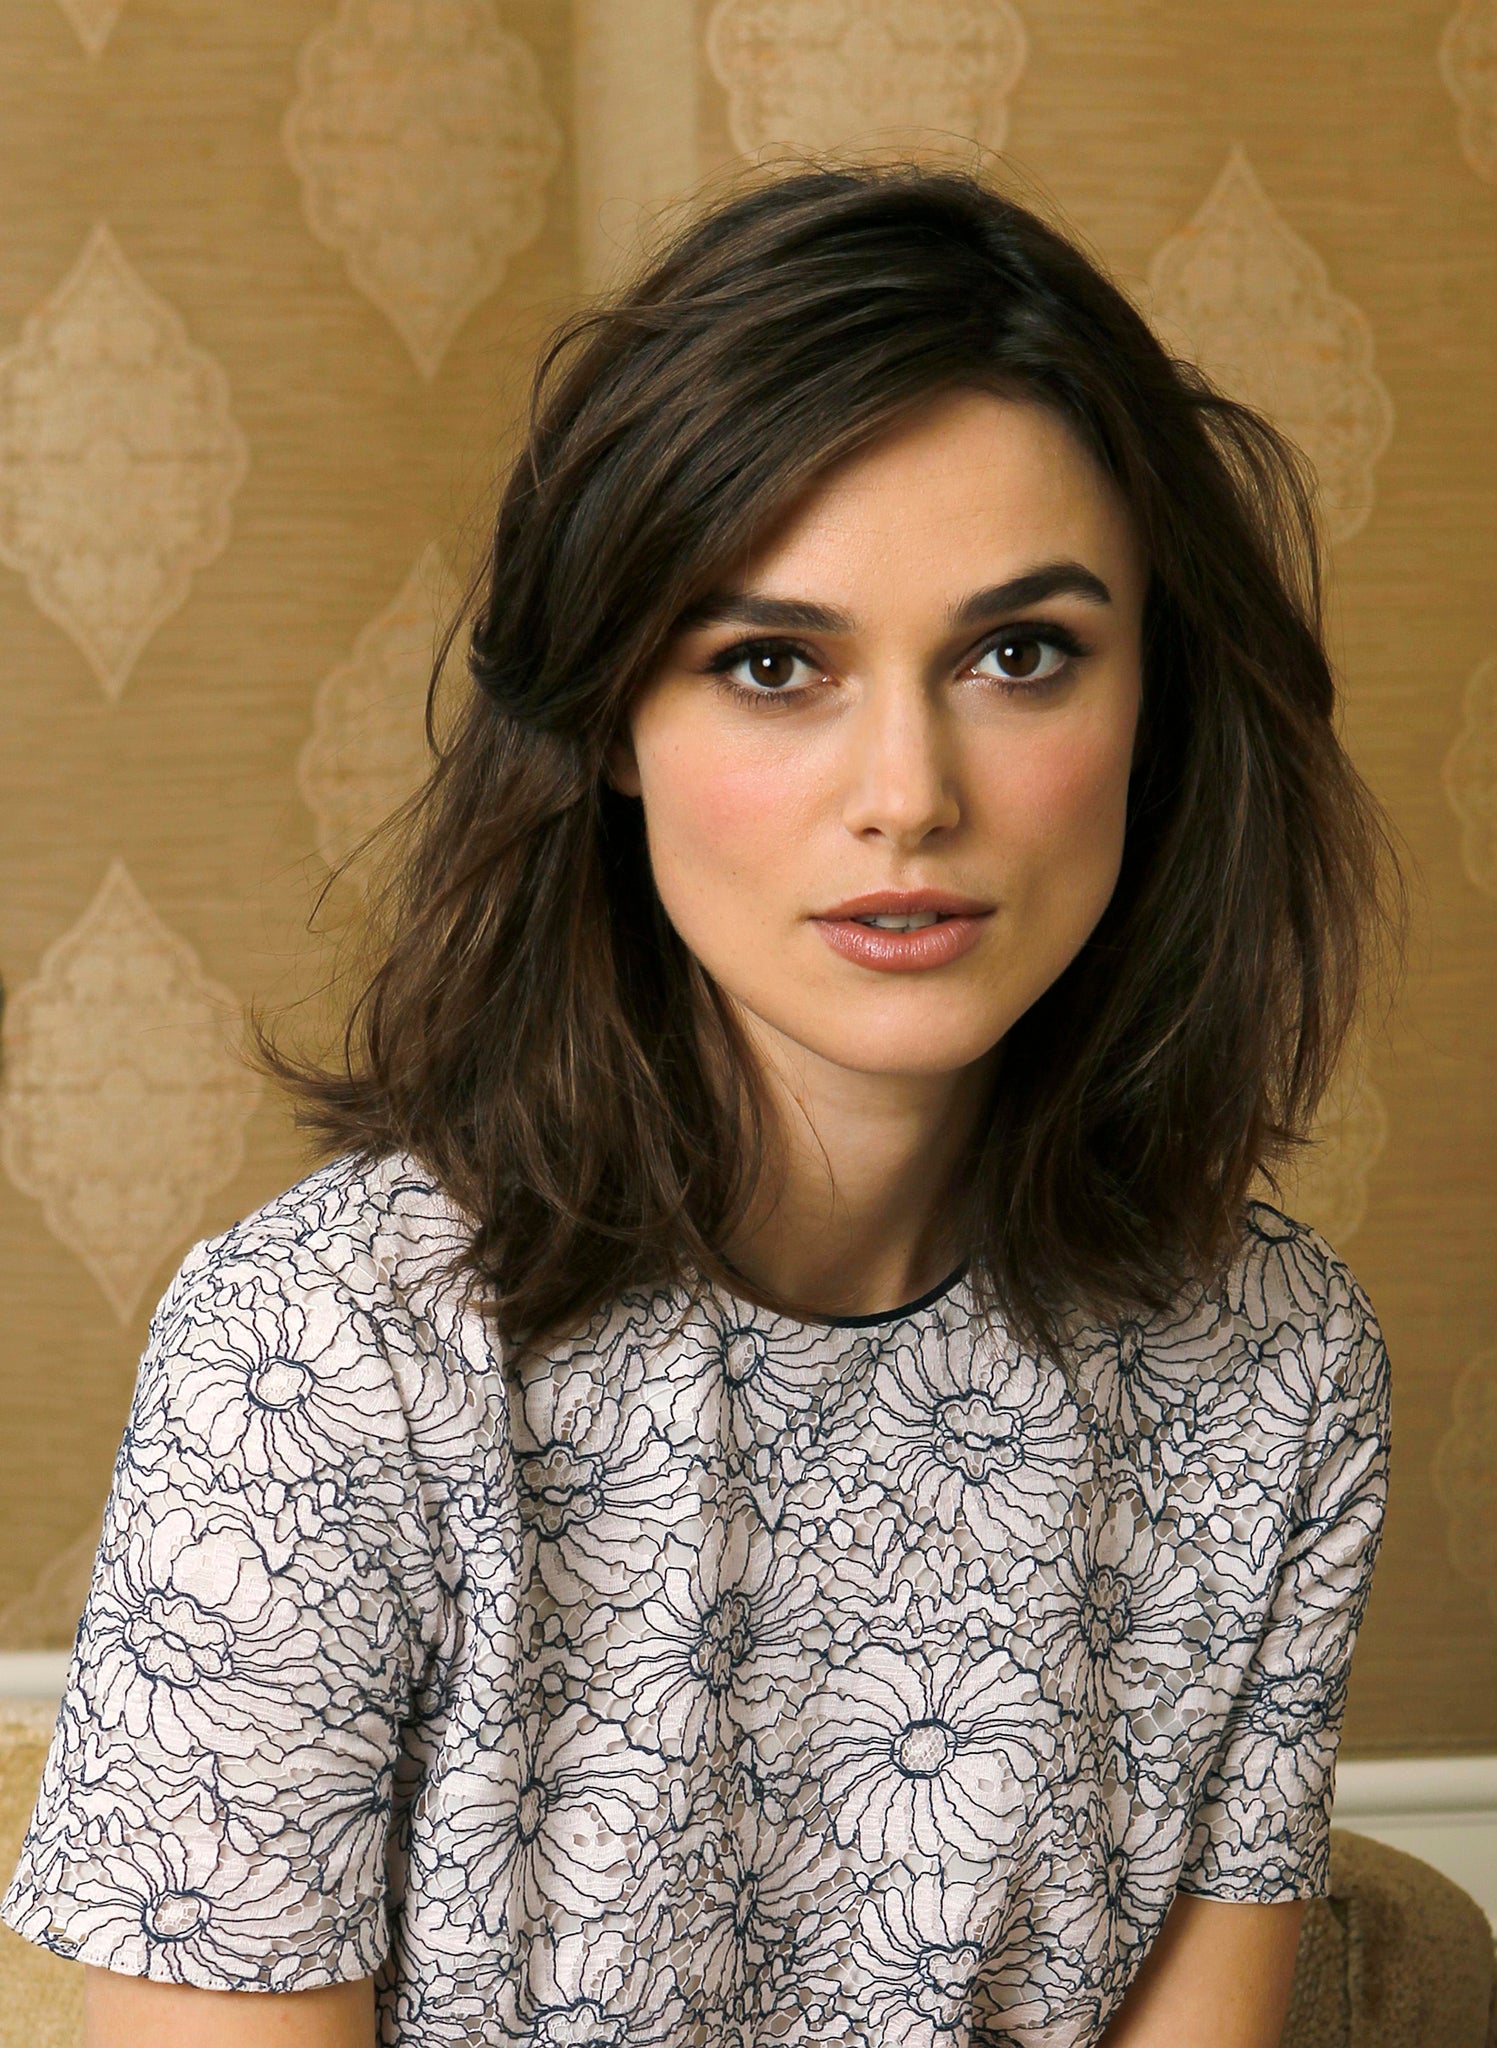 Keira Knightley has ruled herself out of the Fifty Shades of Grey films